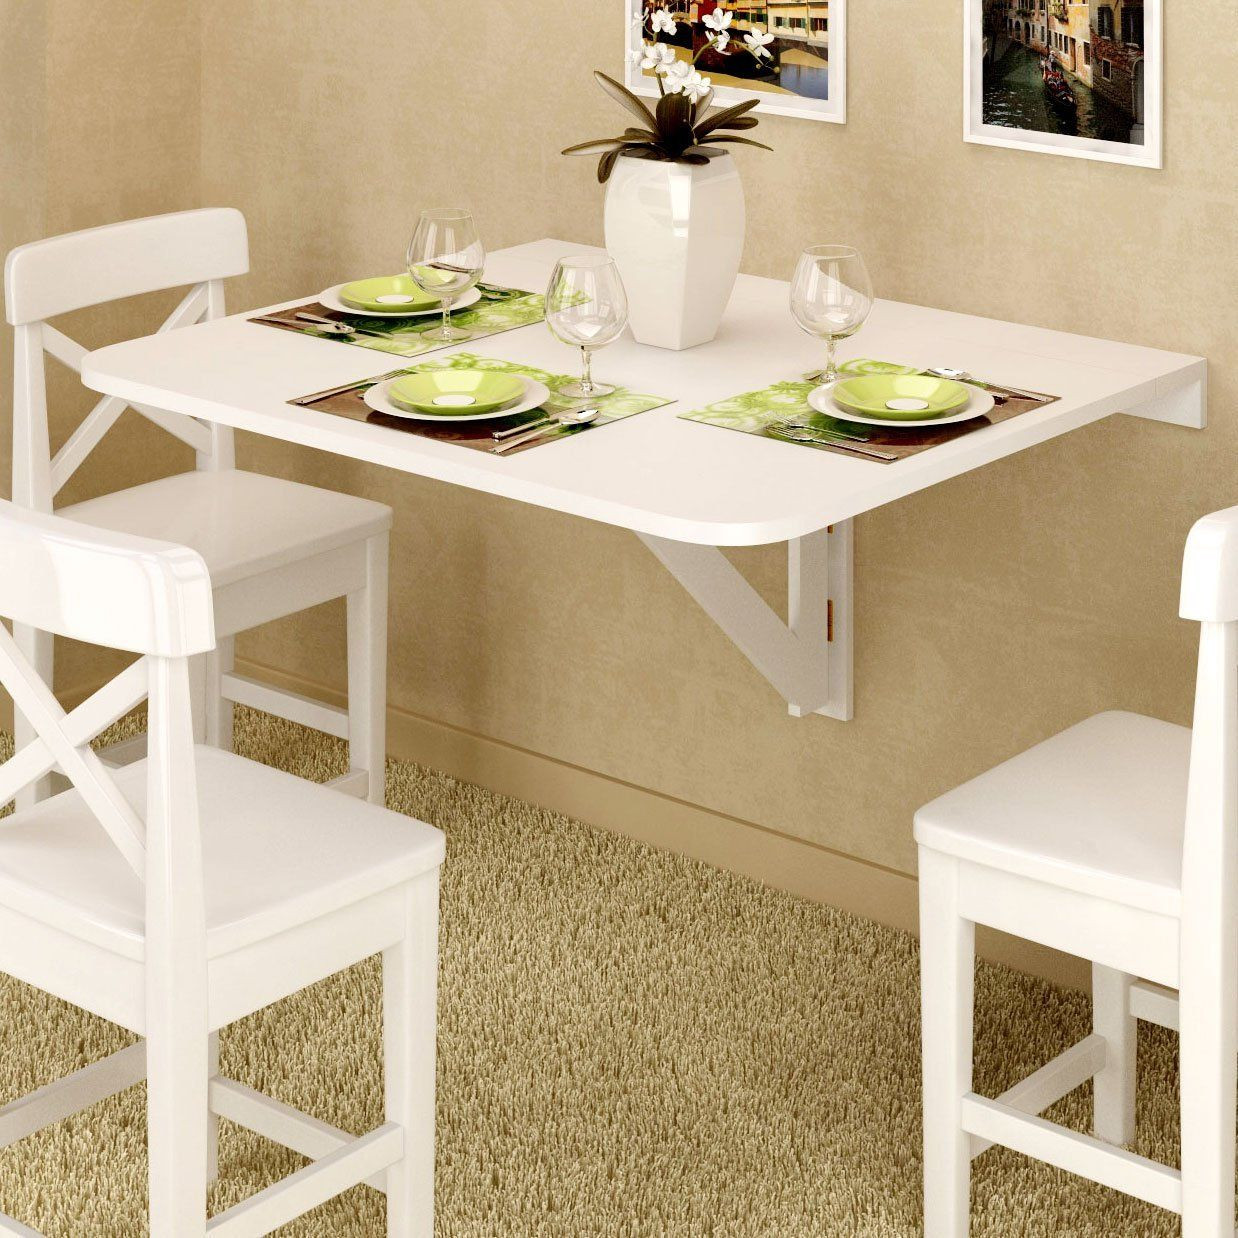 Wall Mounted Kitchen Tables
 Amazon Wall Mount Drop Leaf Table White Solid